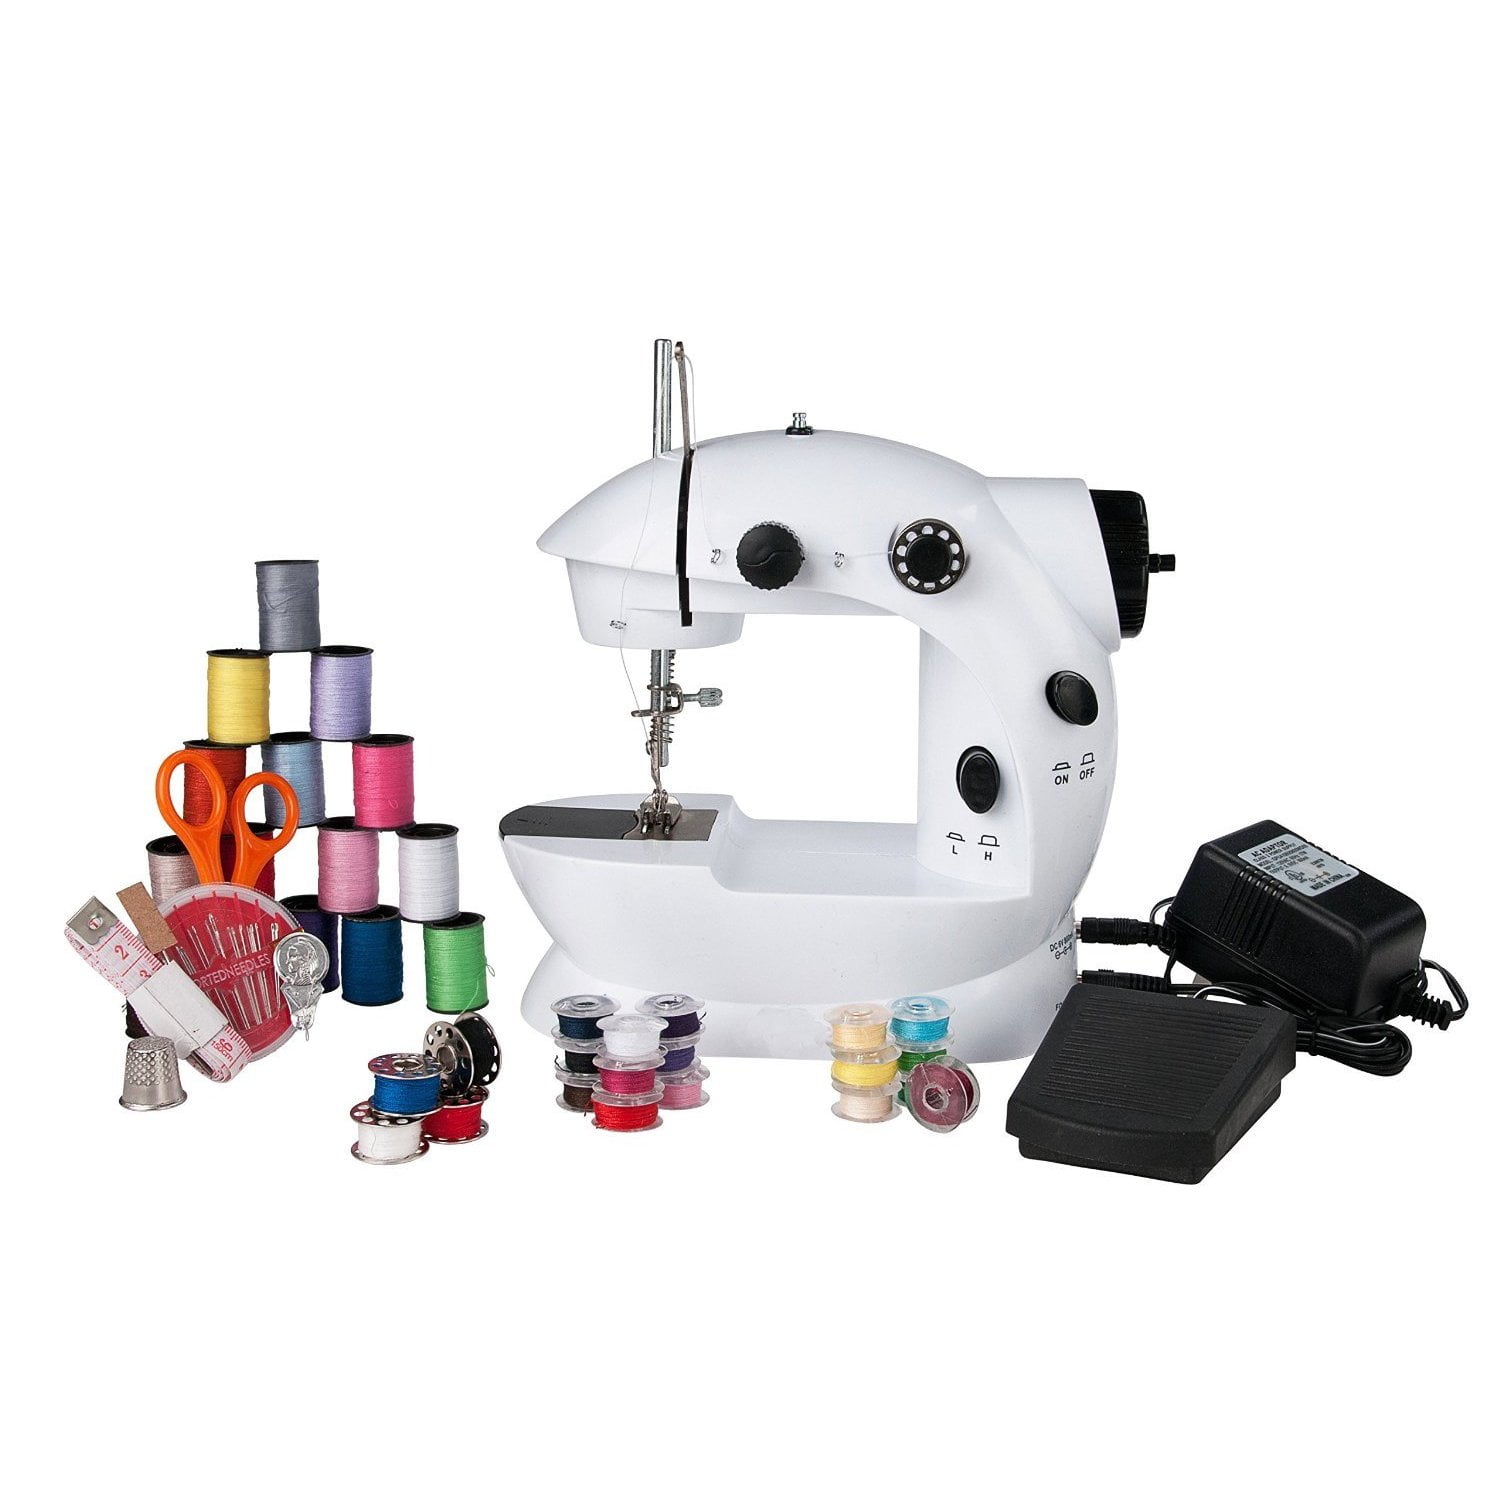 Sewing Machine Cleaning Kit - 3073640913518